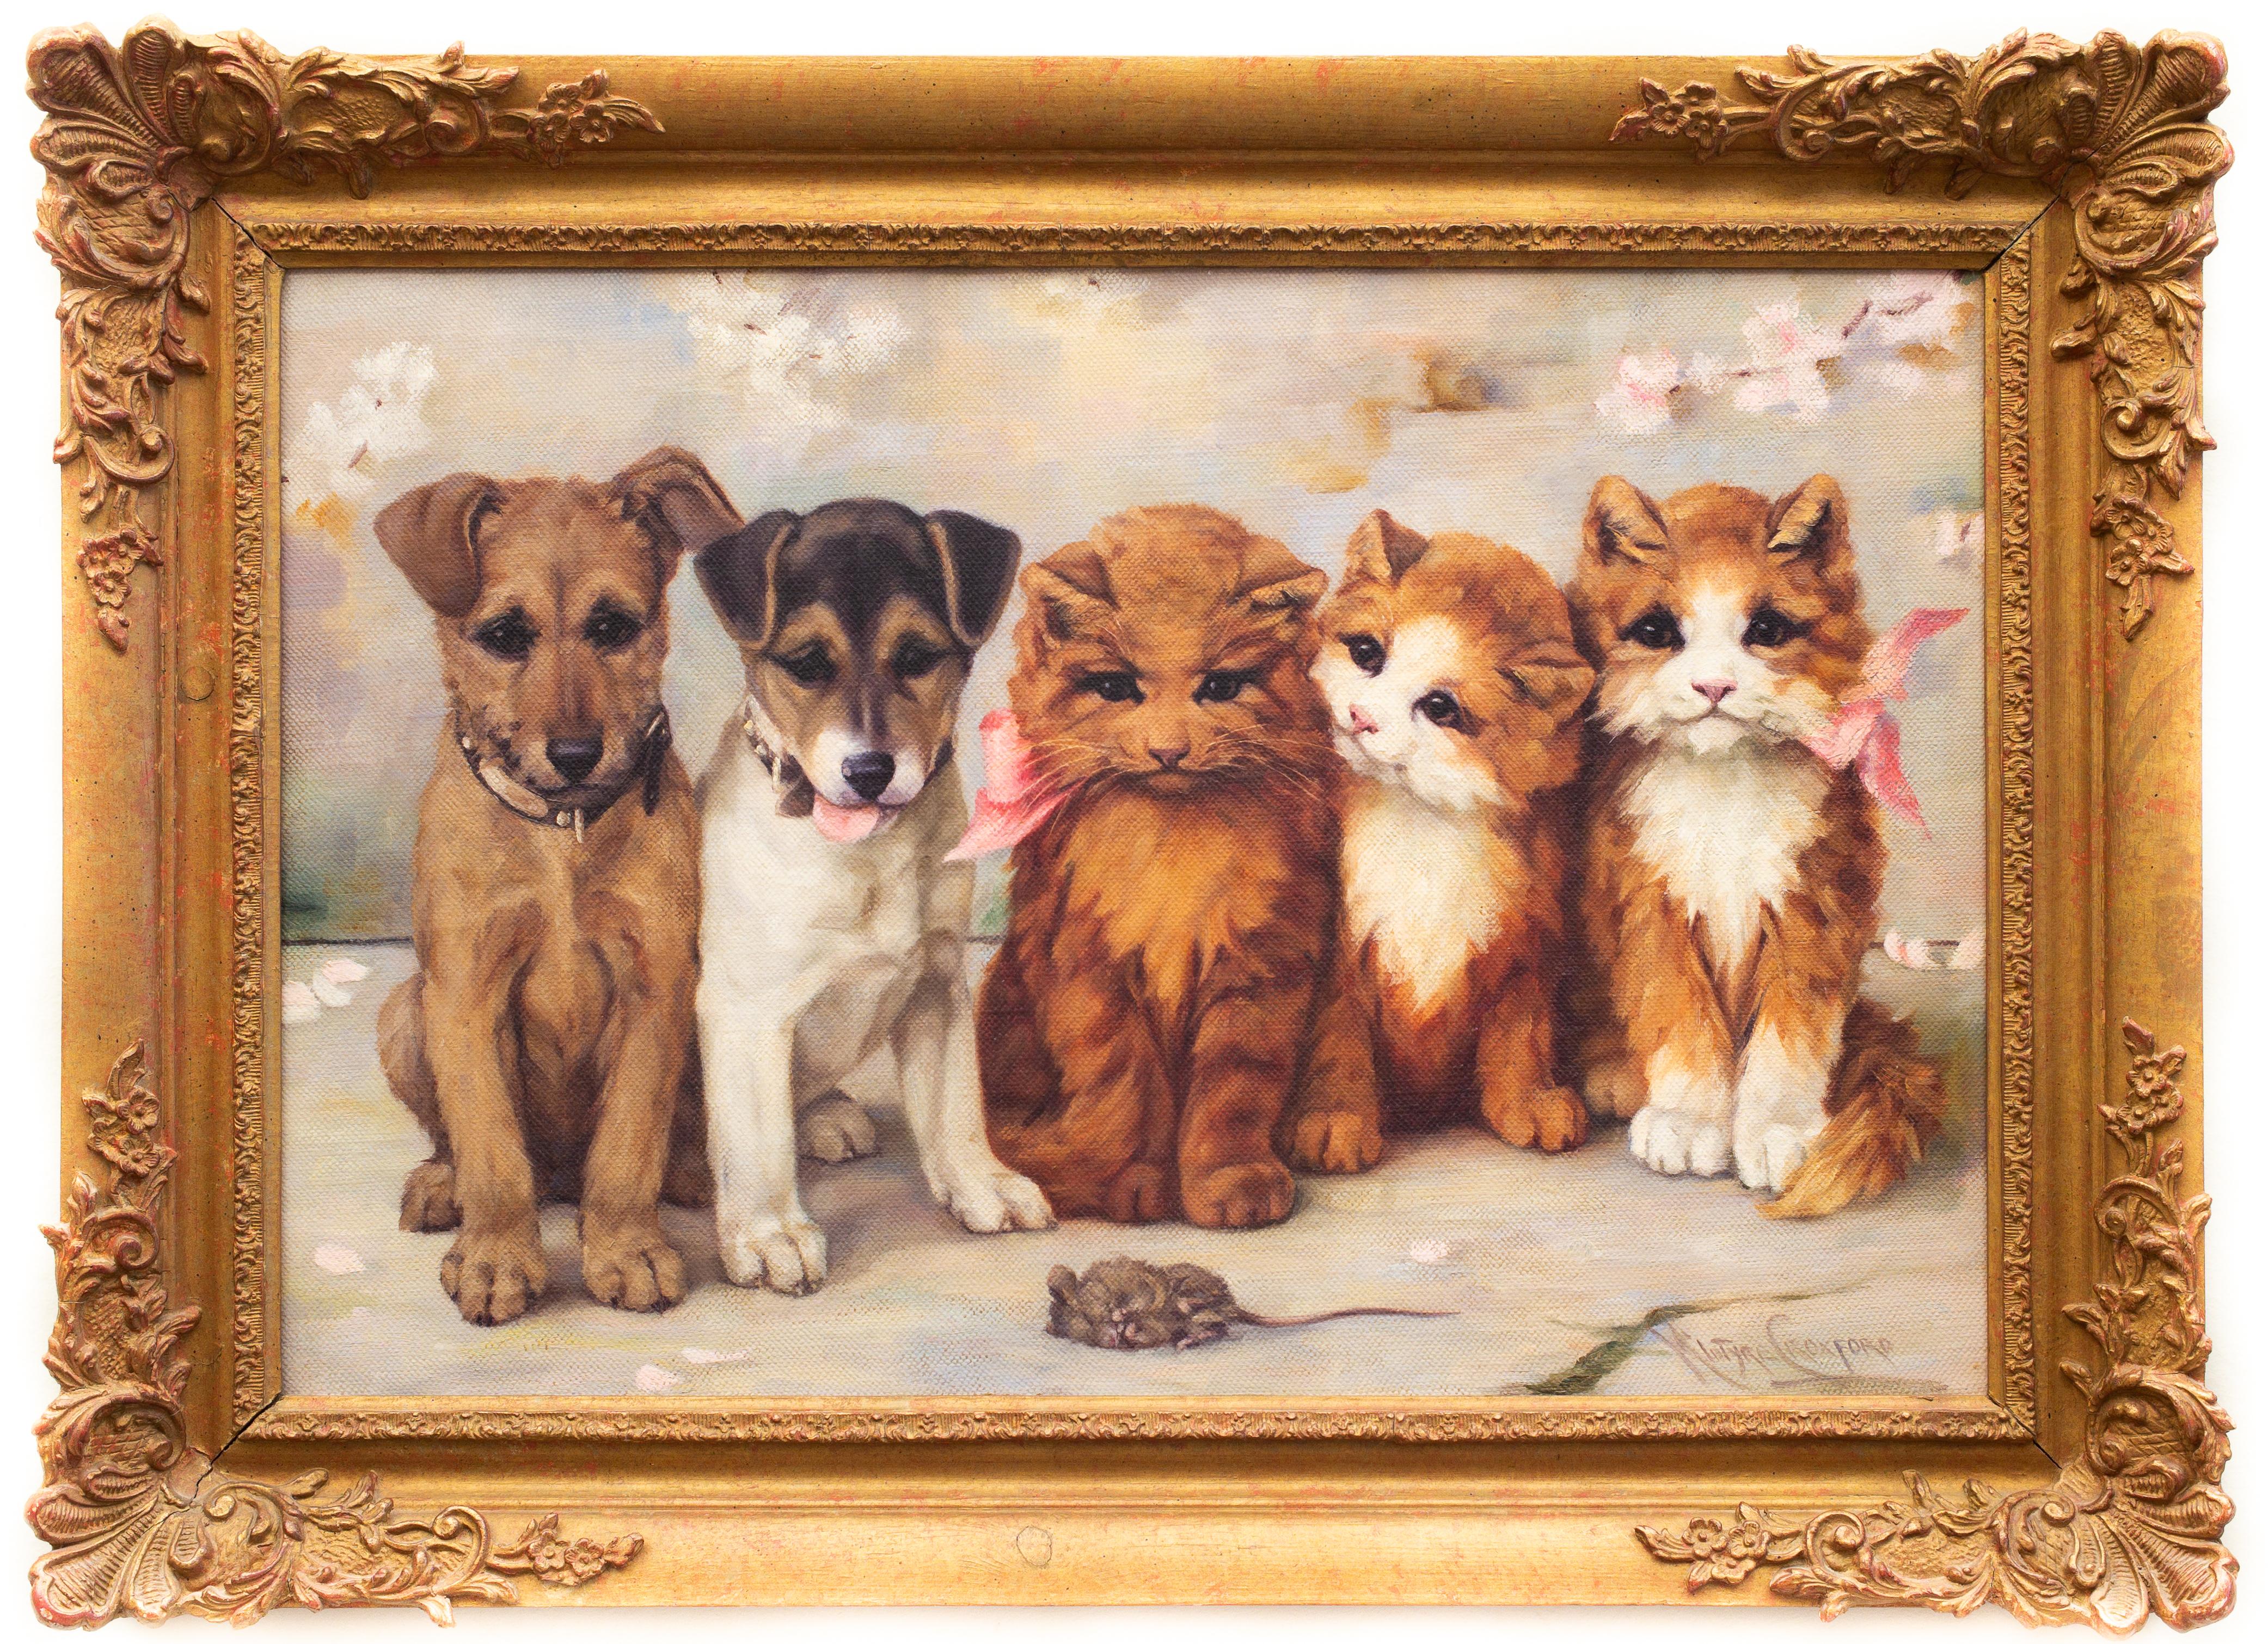 "Friends" by Agnes McIntyre Croxford is a testament to the artist's ability to capture the delicate balance of harmony and curiosity in the animal kingdom. This painting presents two small dogs and three cats seated together, all gazing